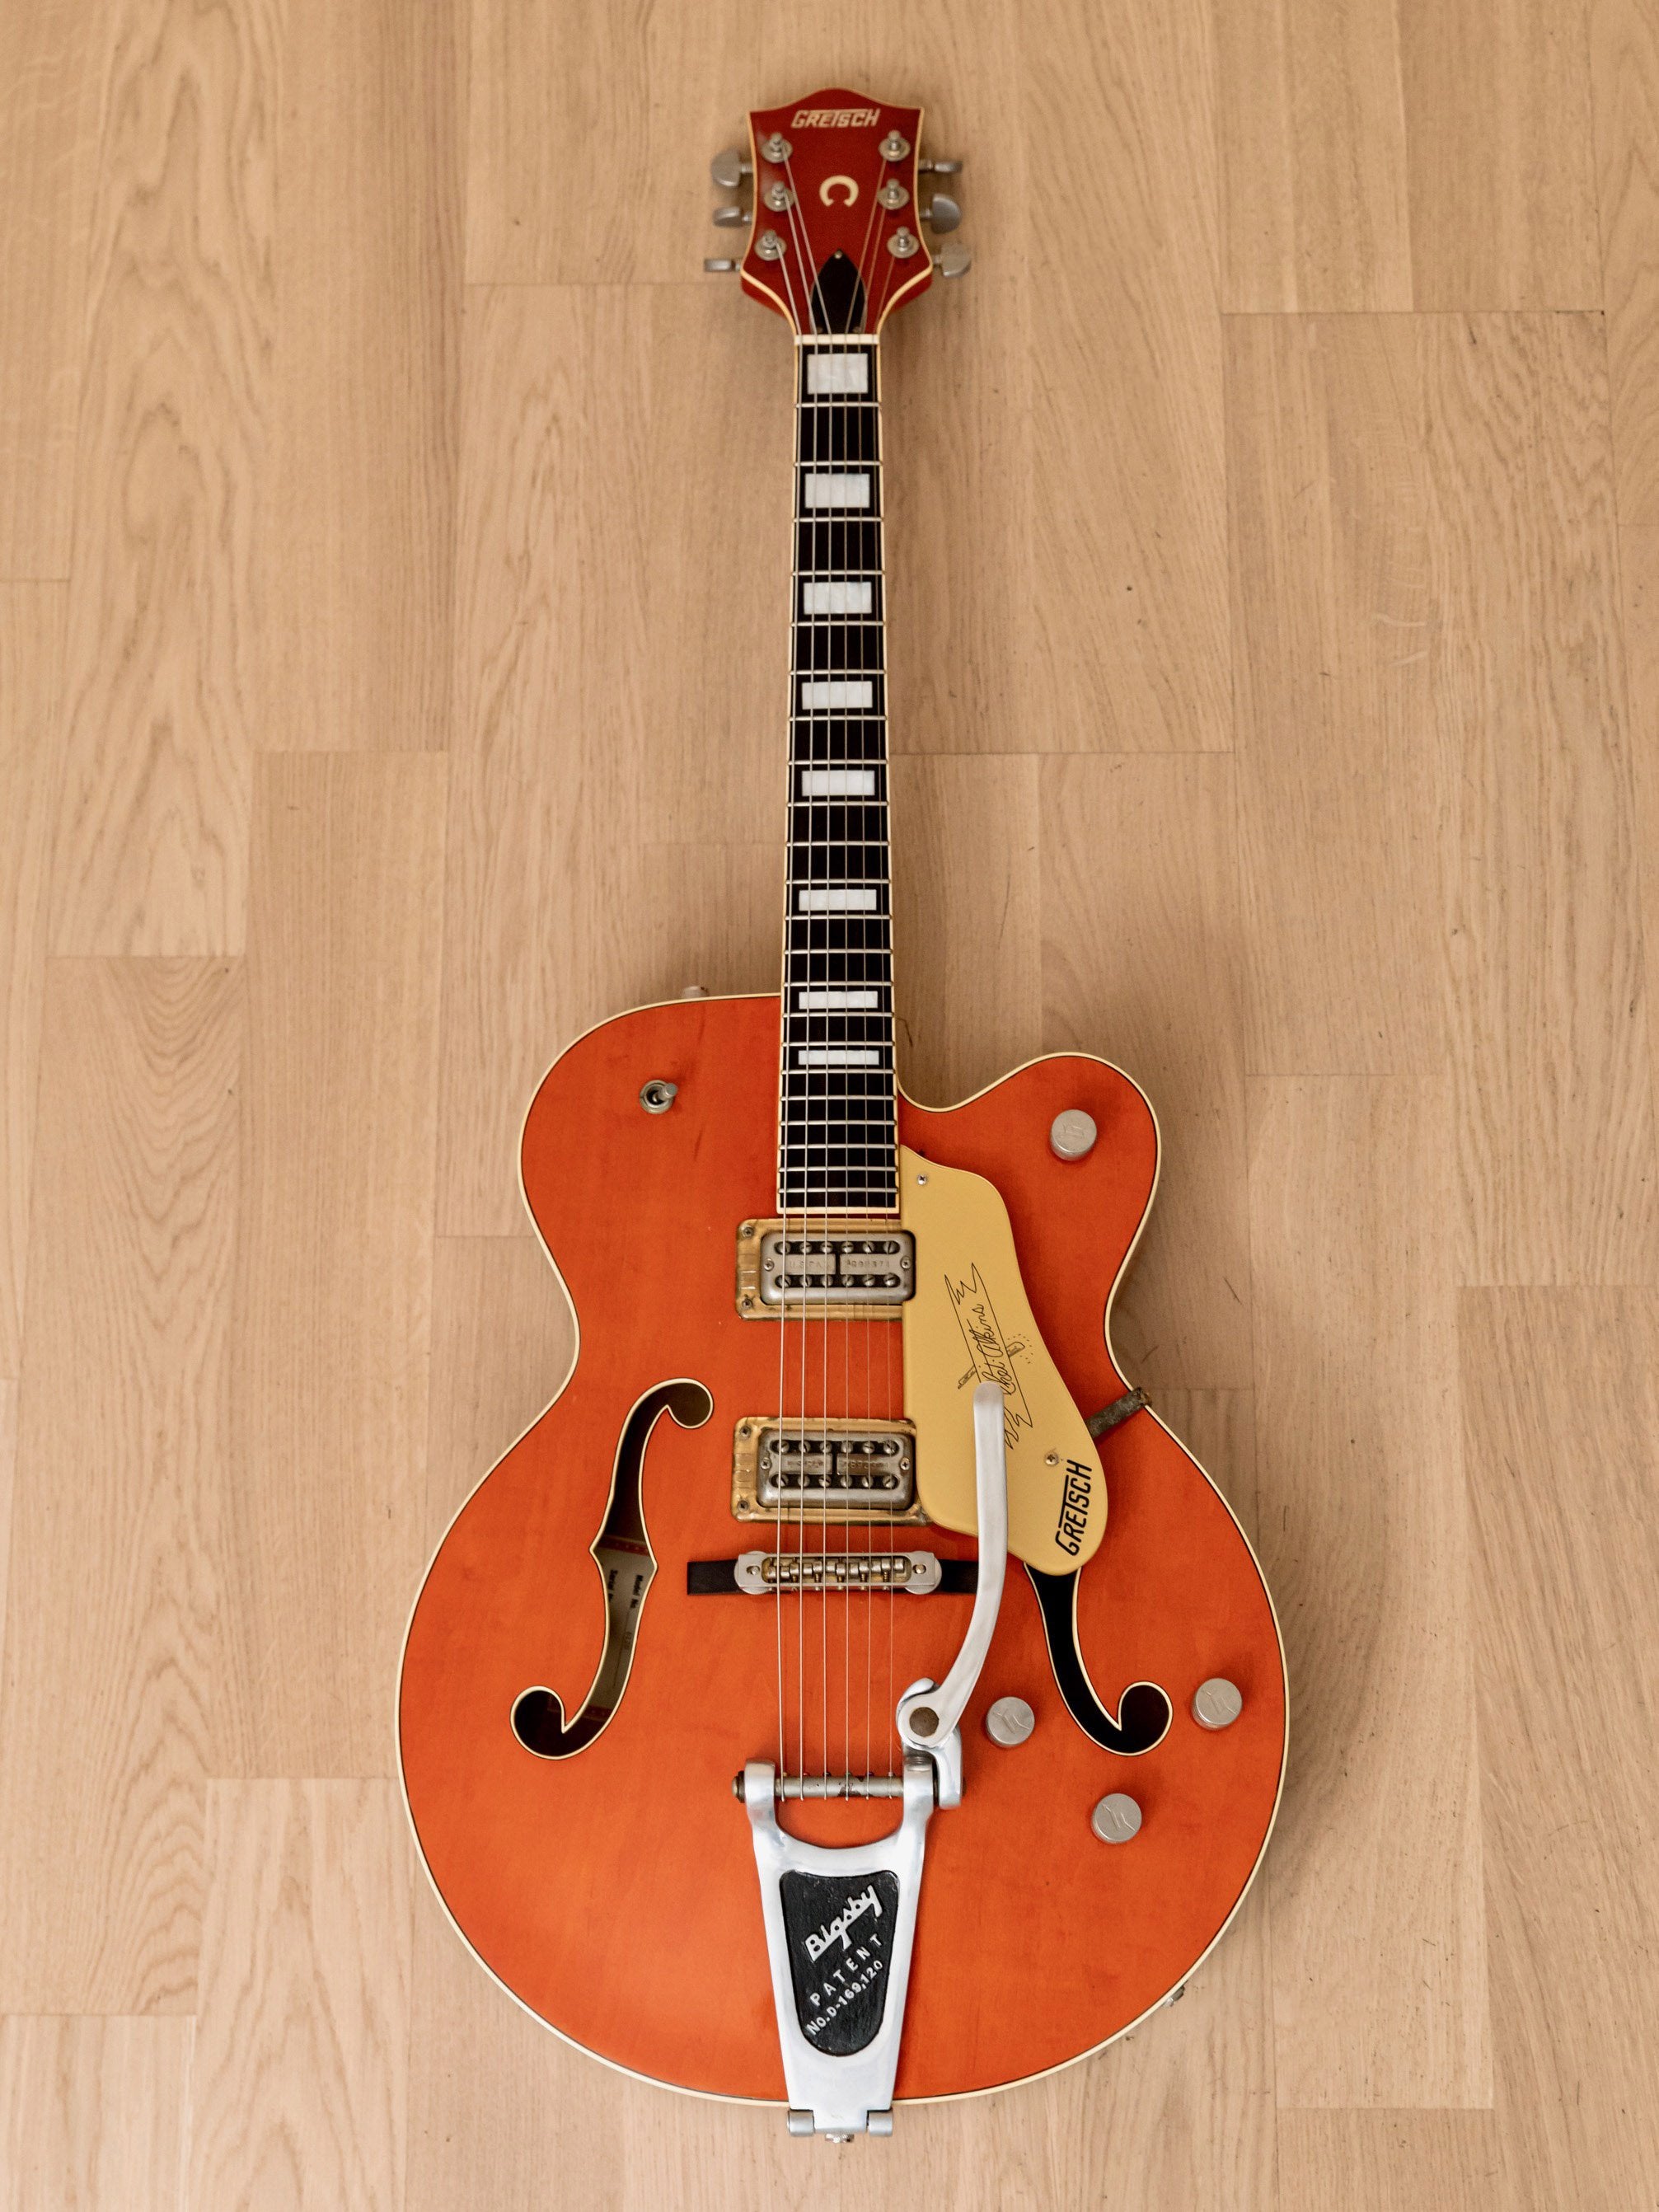 1989 Gretsch 6120 Chet Atkins Electric Guitar Western Orange w/ Bigsby, FilterTrons, Case